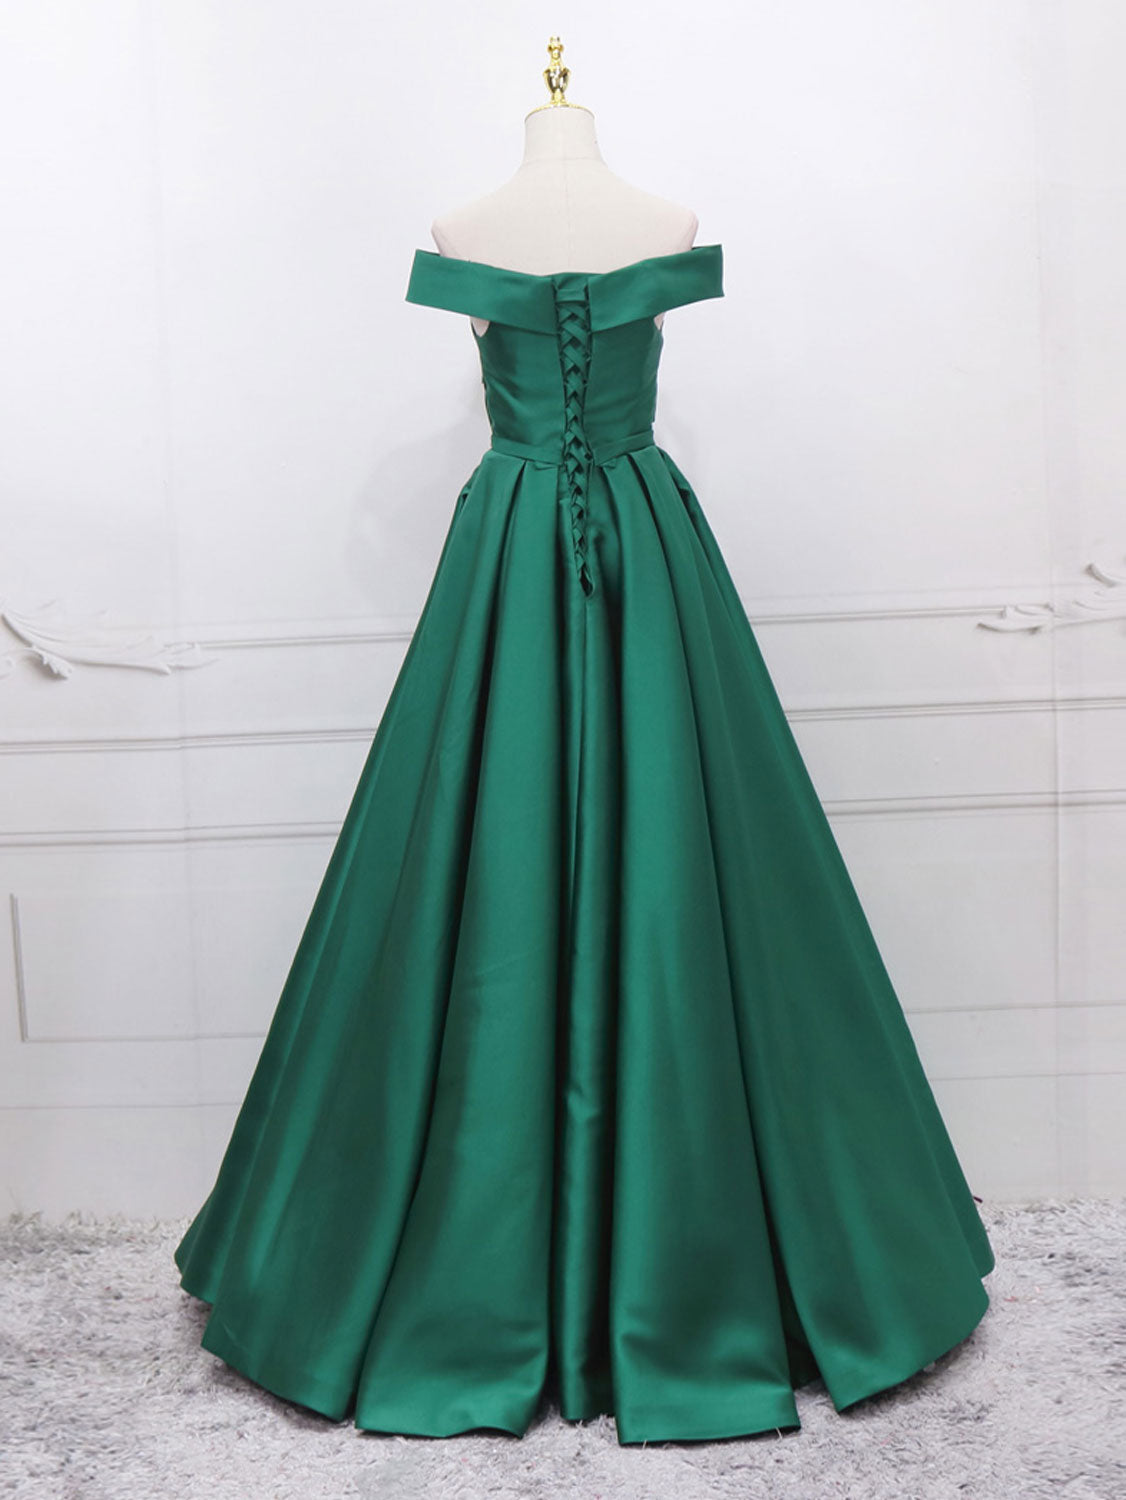 Classy Emerald Green Off The Shoulder Ball Gown Formal Dress Prom Dress - DollyGown